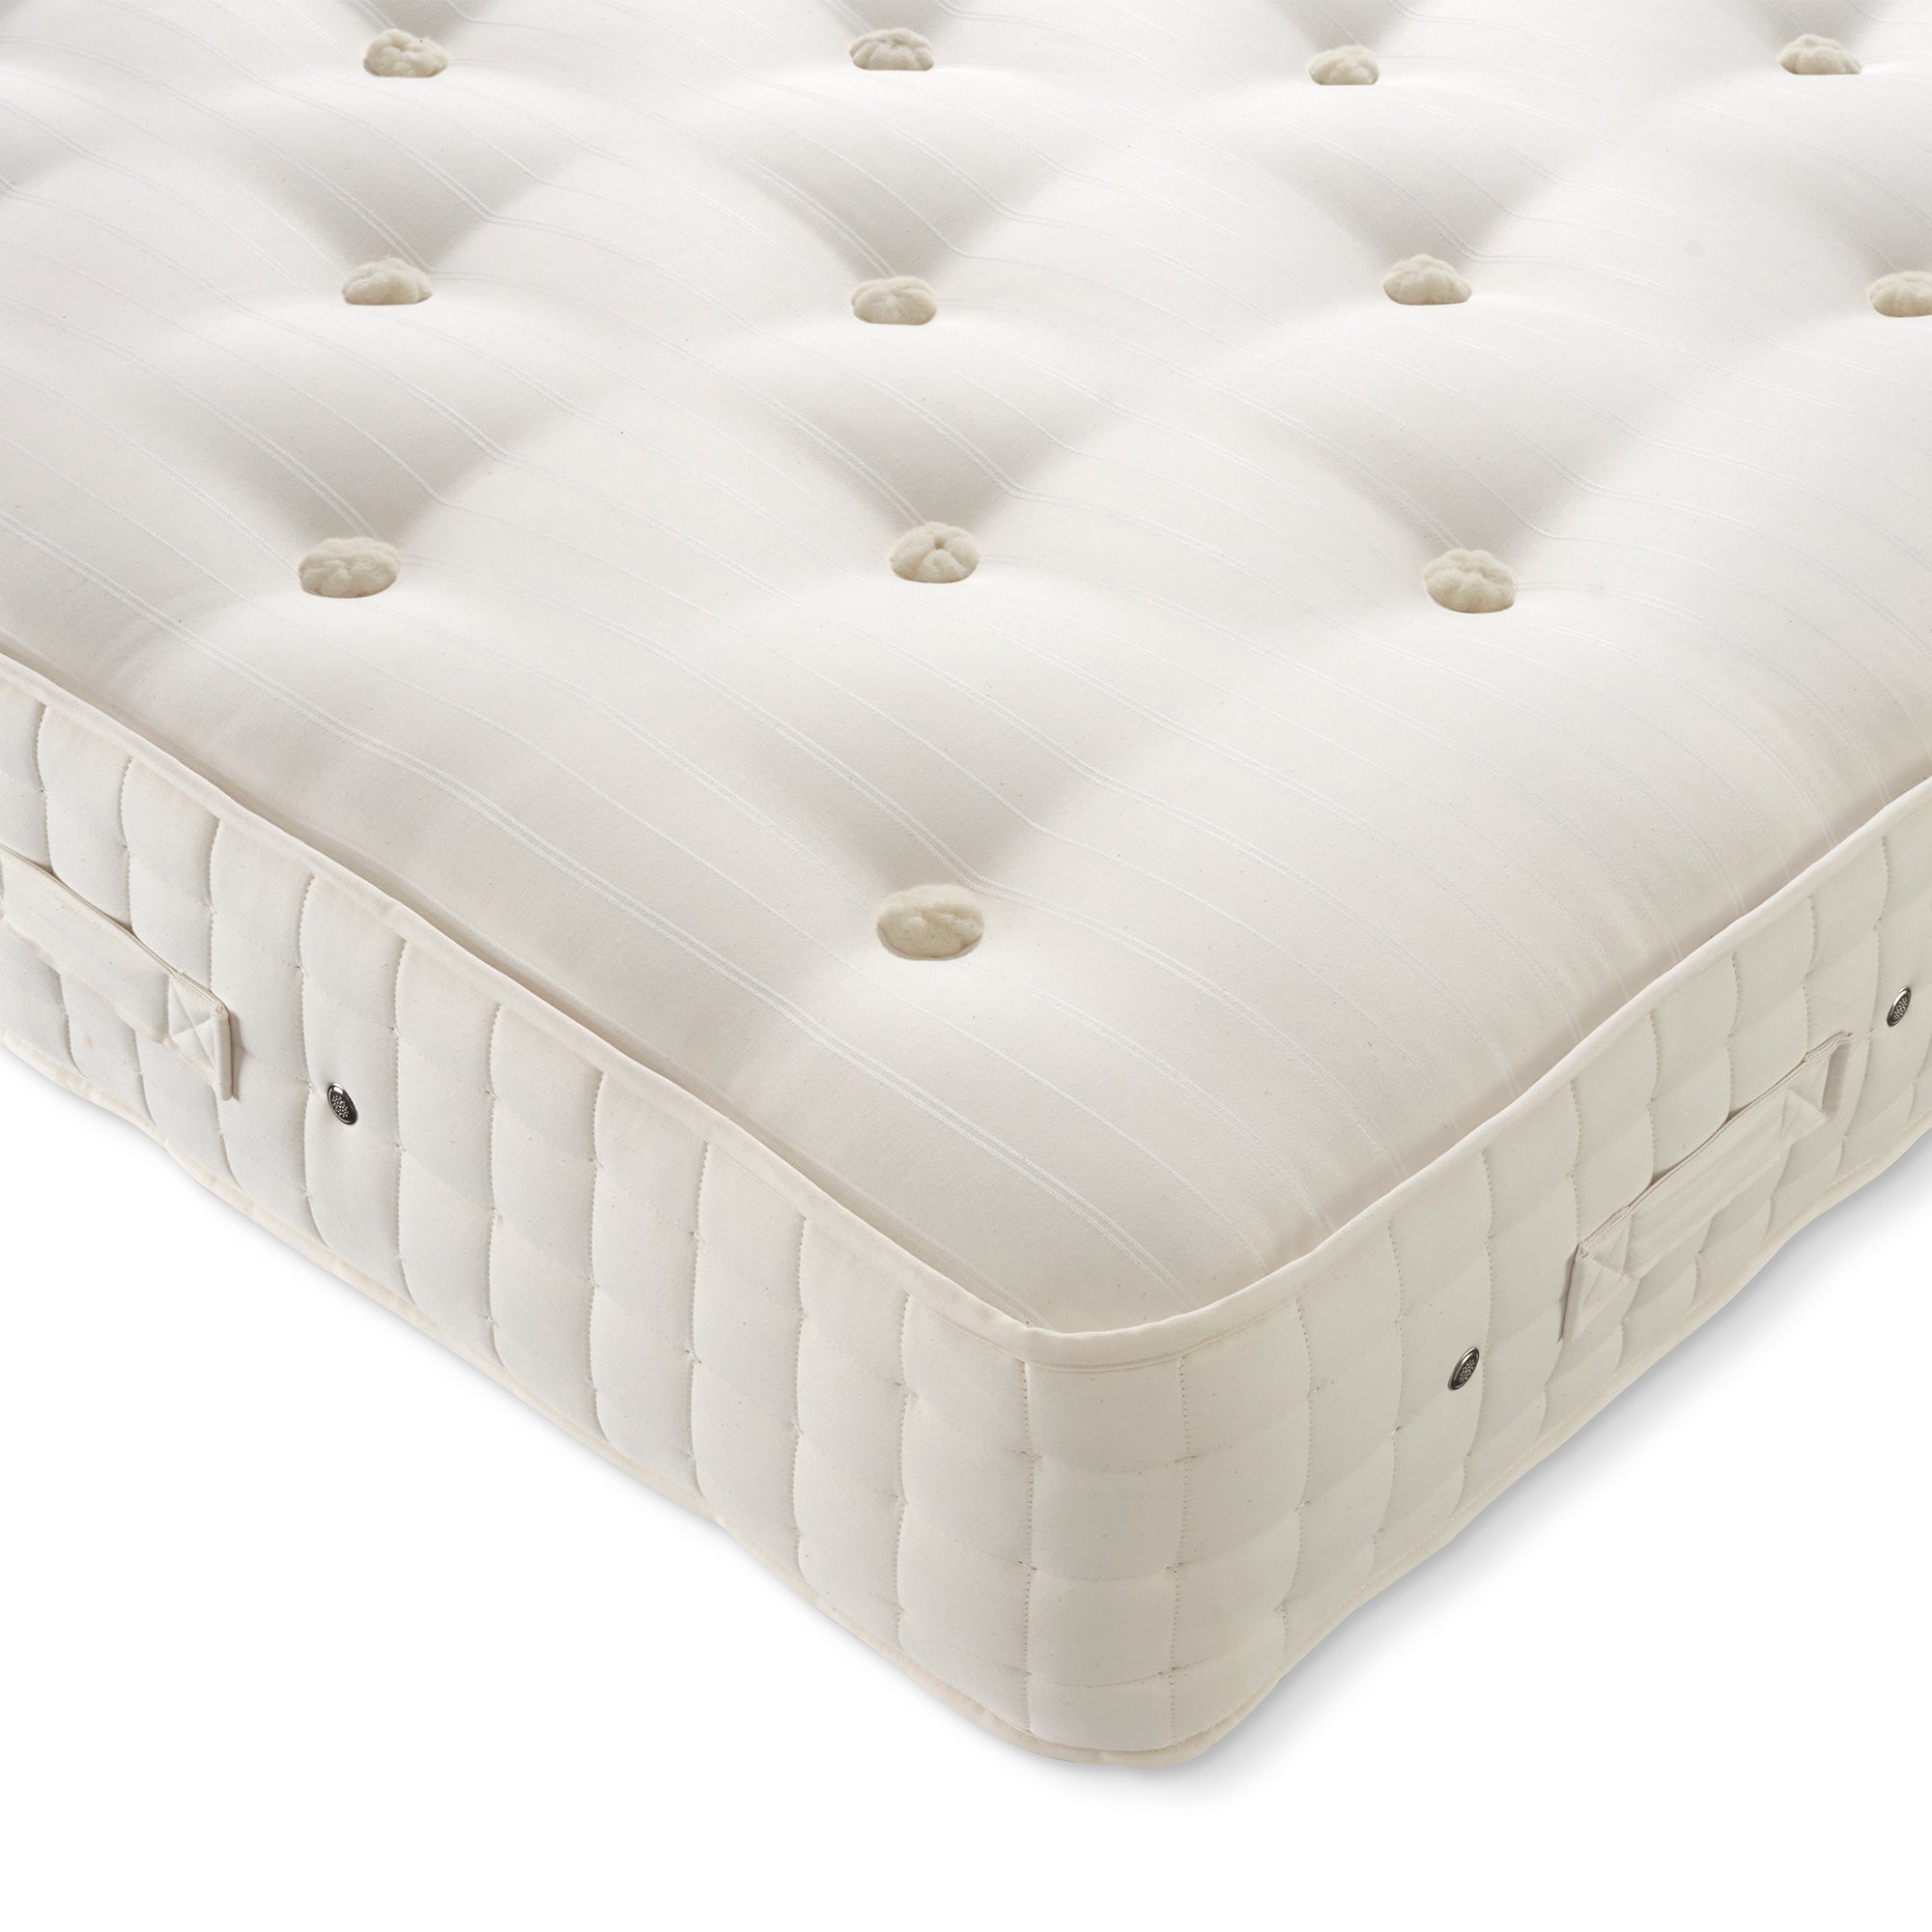 Hypnos Orthocare Superior - Mattress Single (90cm) In Firm Tension